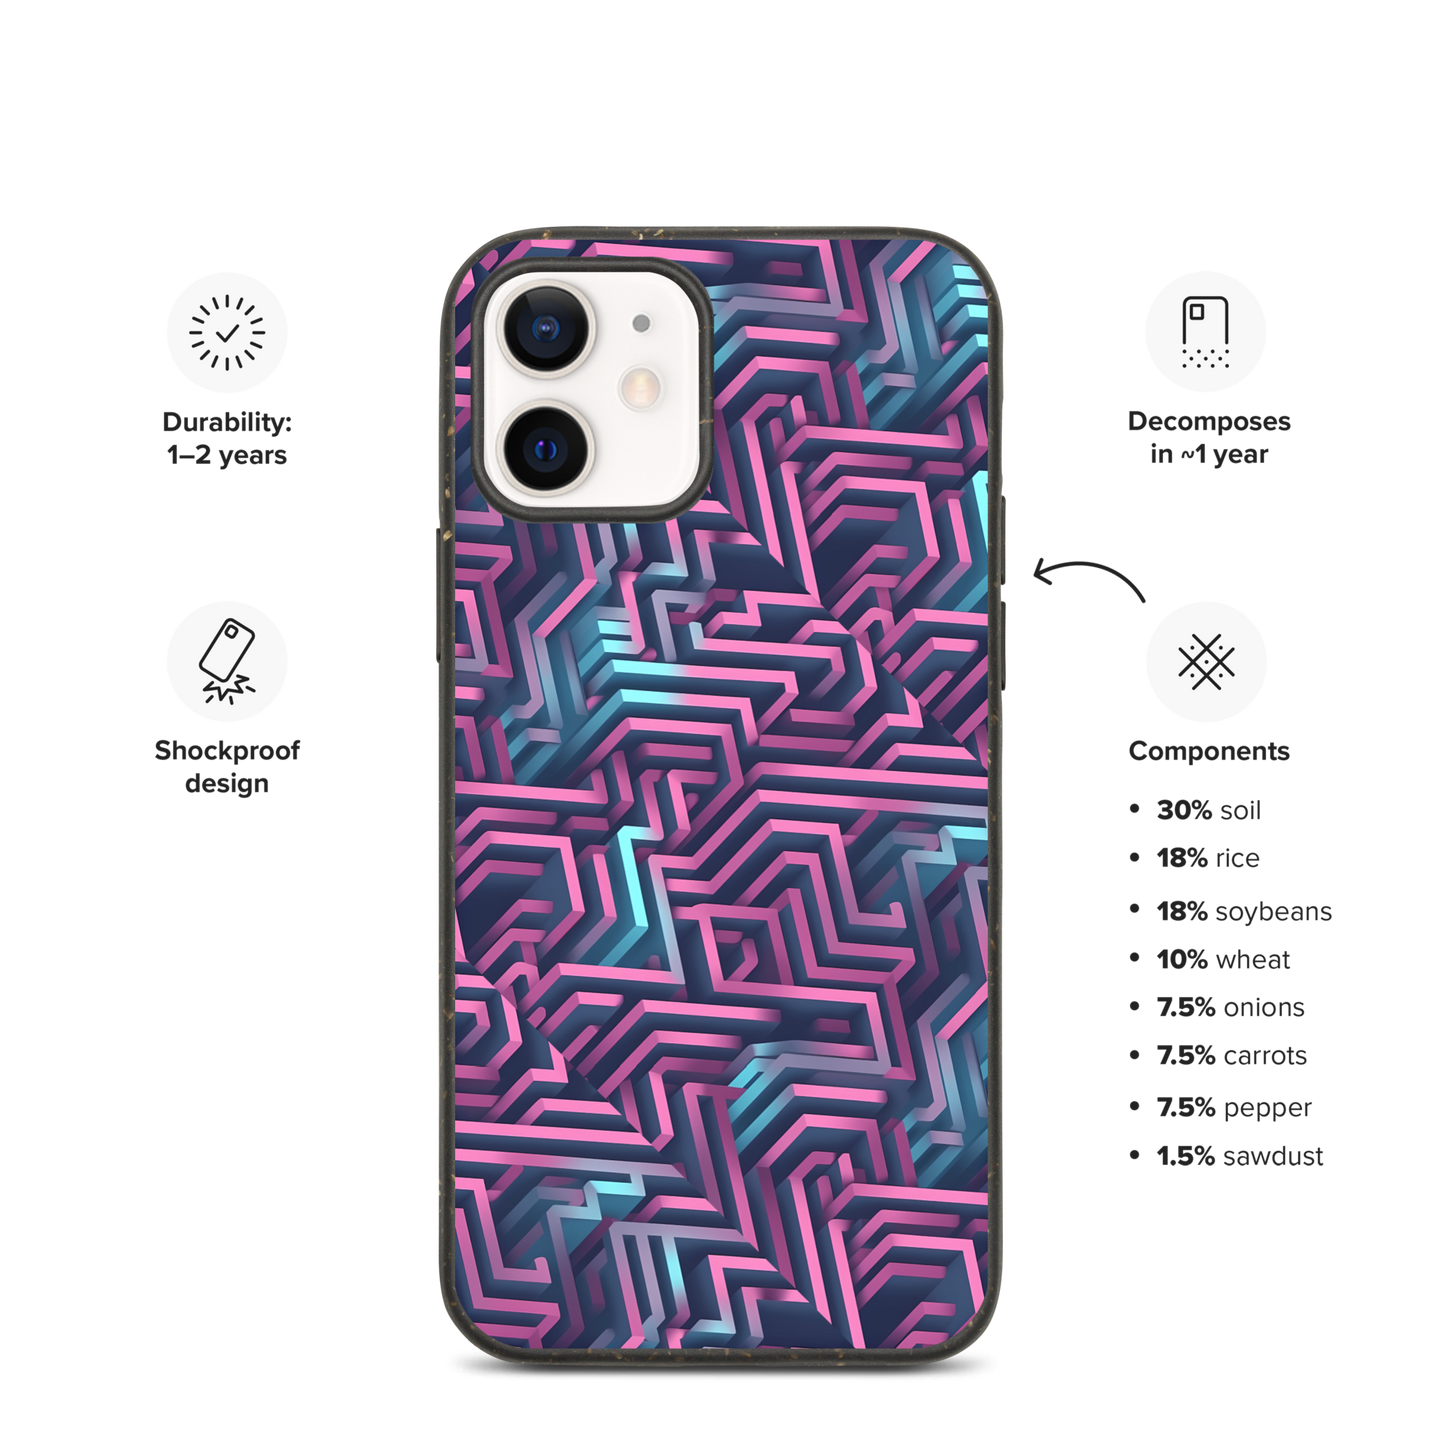 3D Maze Illusion | 3D Patterns | Speckled Case for iPhone - #4